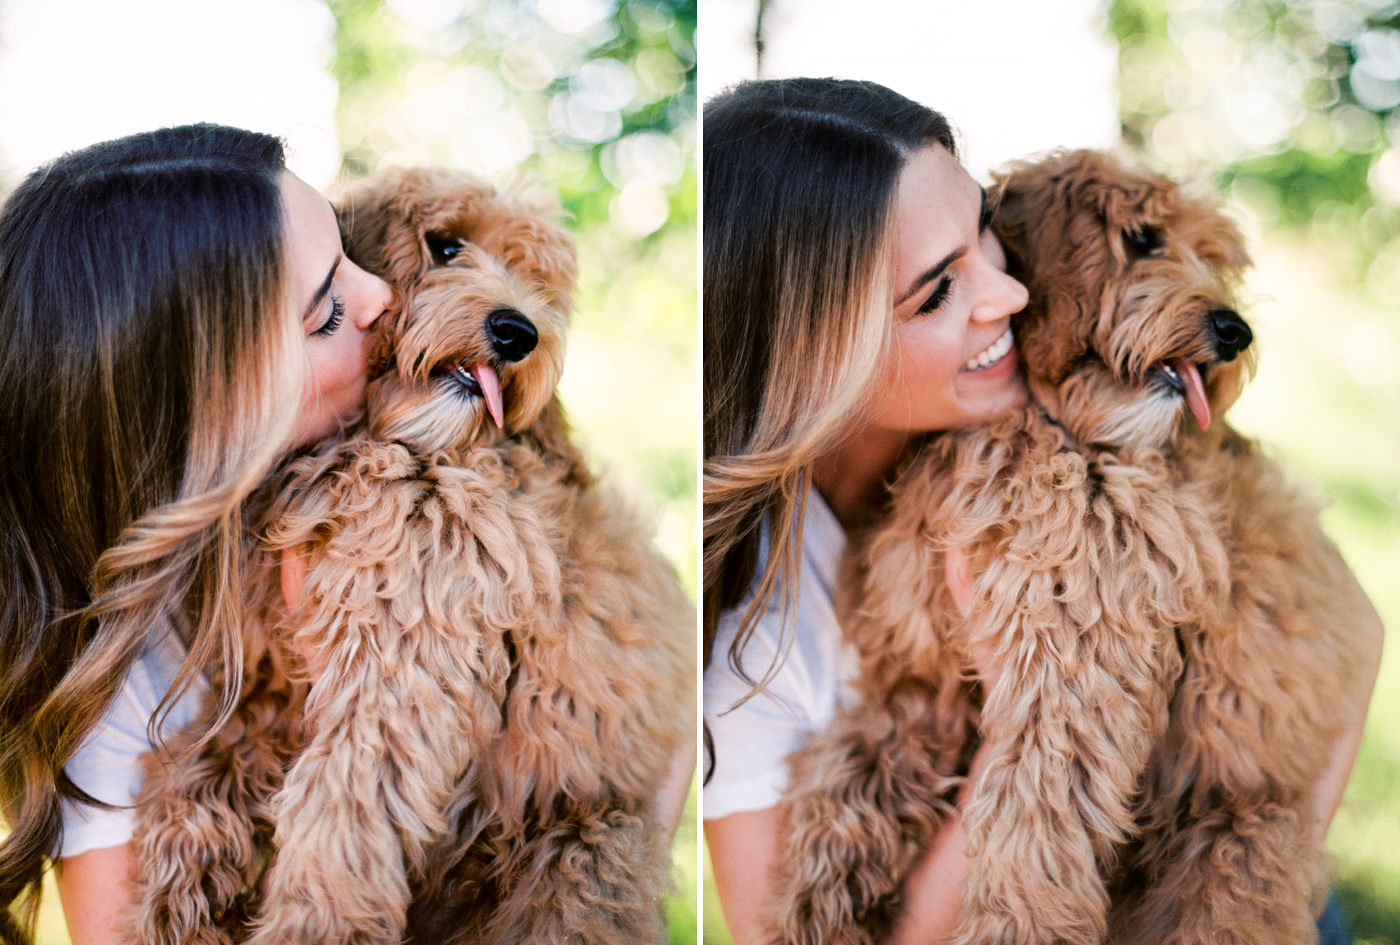 011-goldendoodle-puppy-at-an-engagement-session-by-film-photographer.jpg